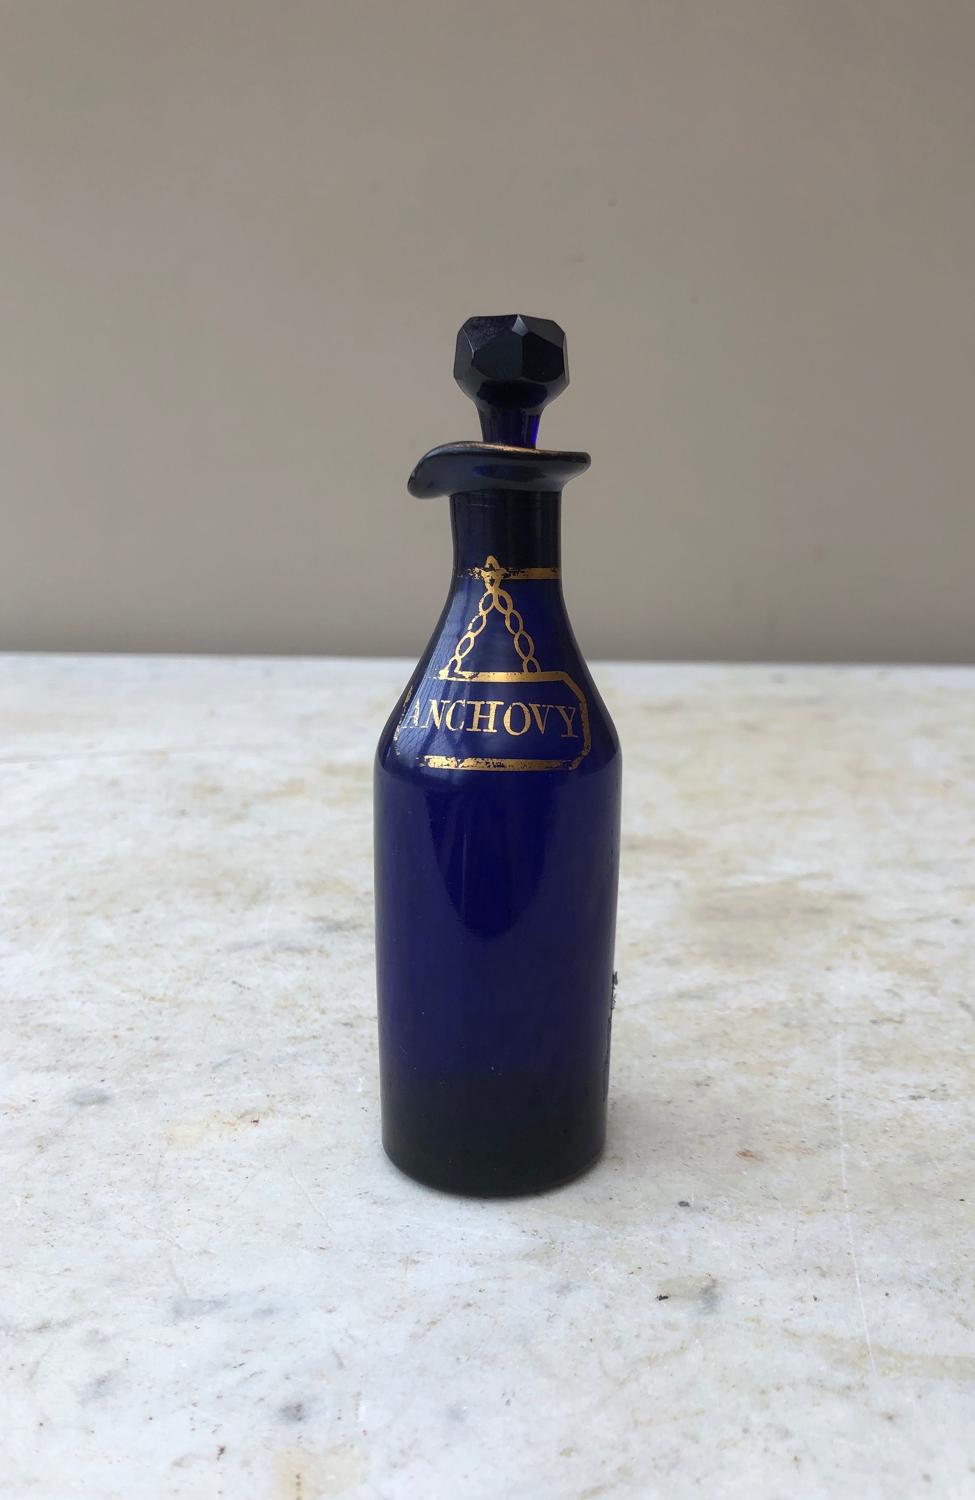 Rare Georgian Cobalt Blue Anchovy Bottle with Orig Stopper